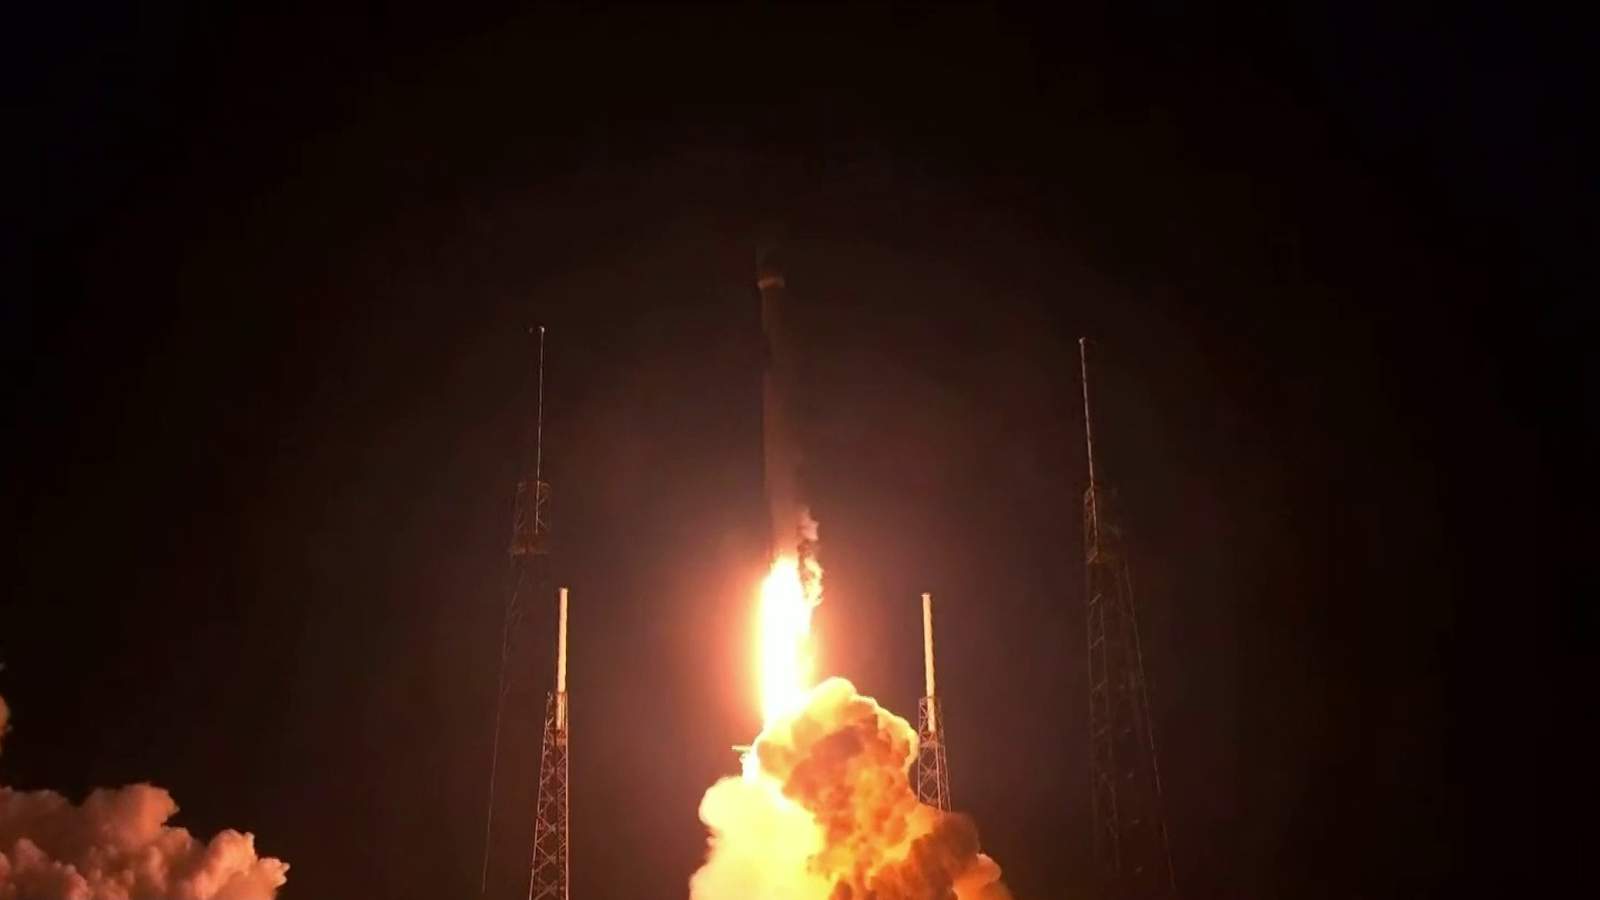 VIDEO: SpaceX launches from Cape Canaveral, nails 47th Falcon 9 landing on drone ship